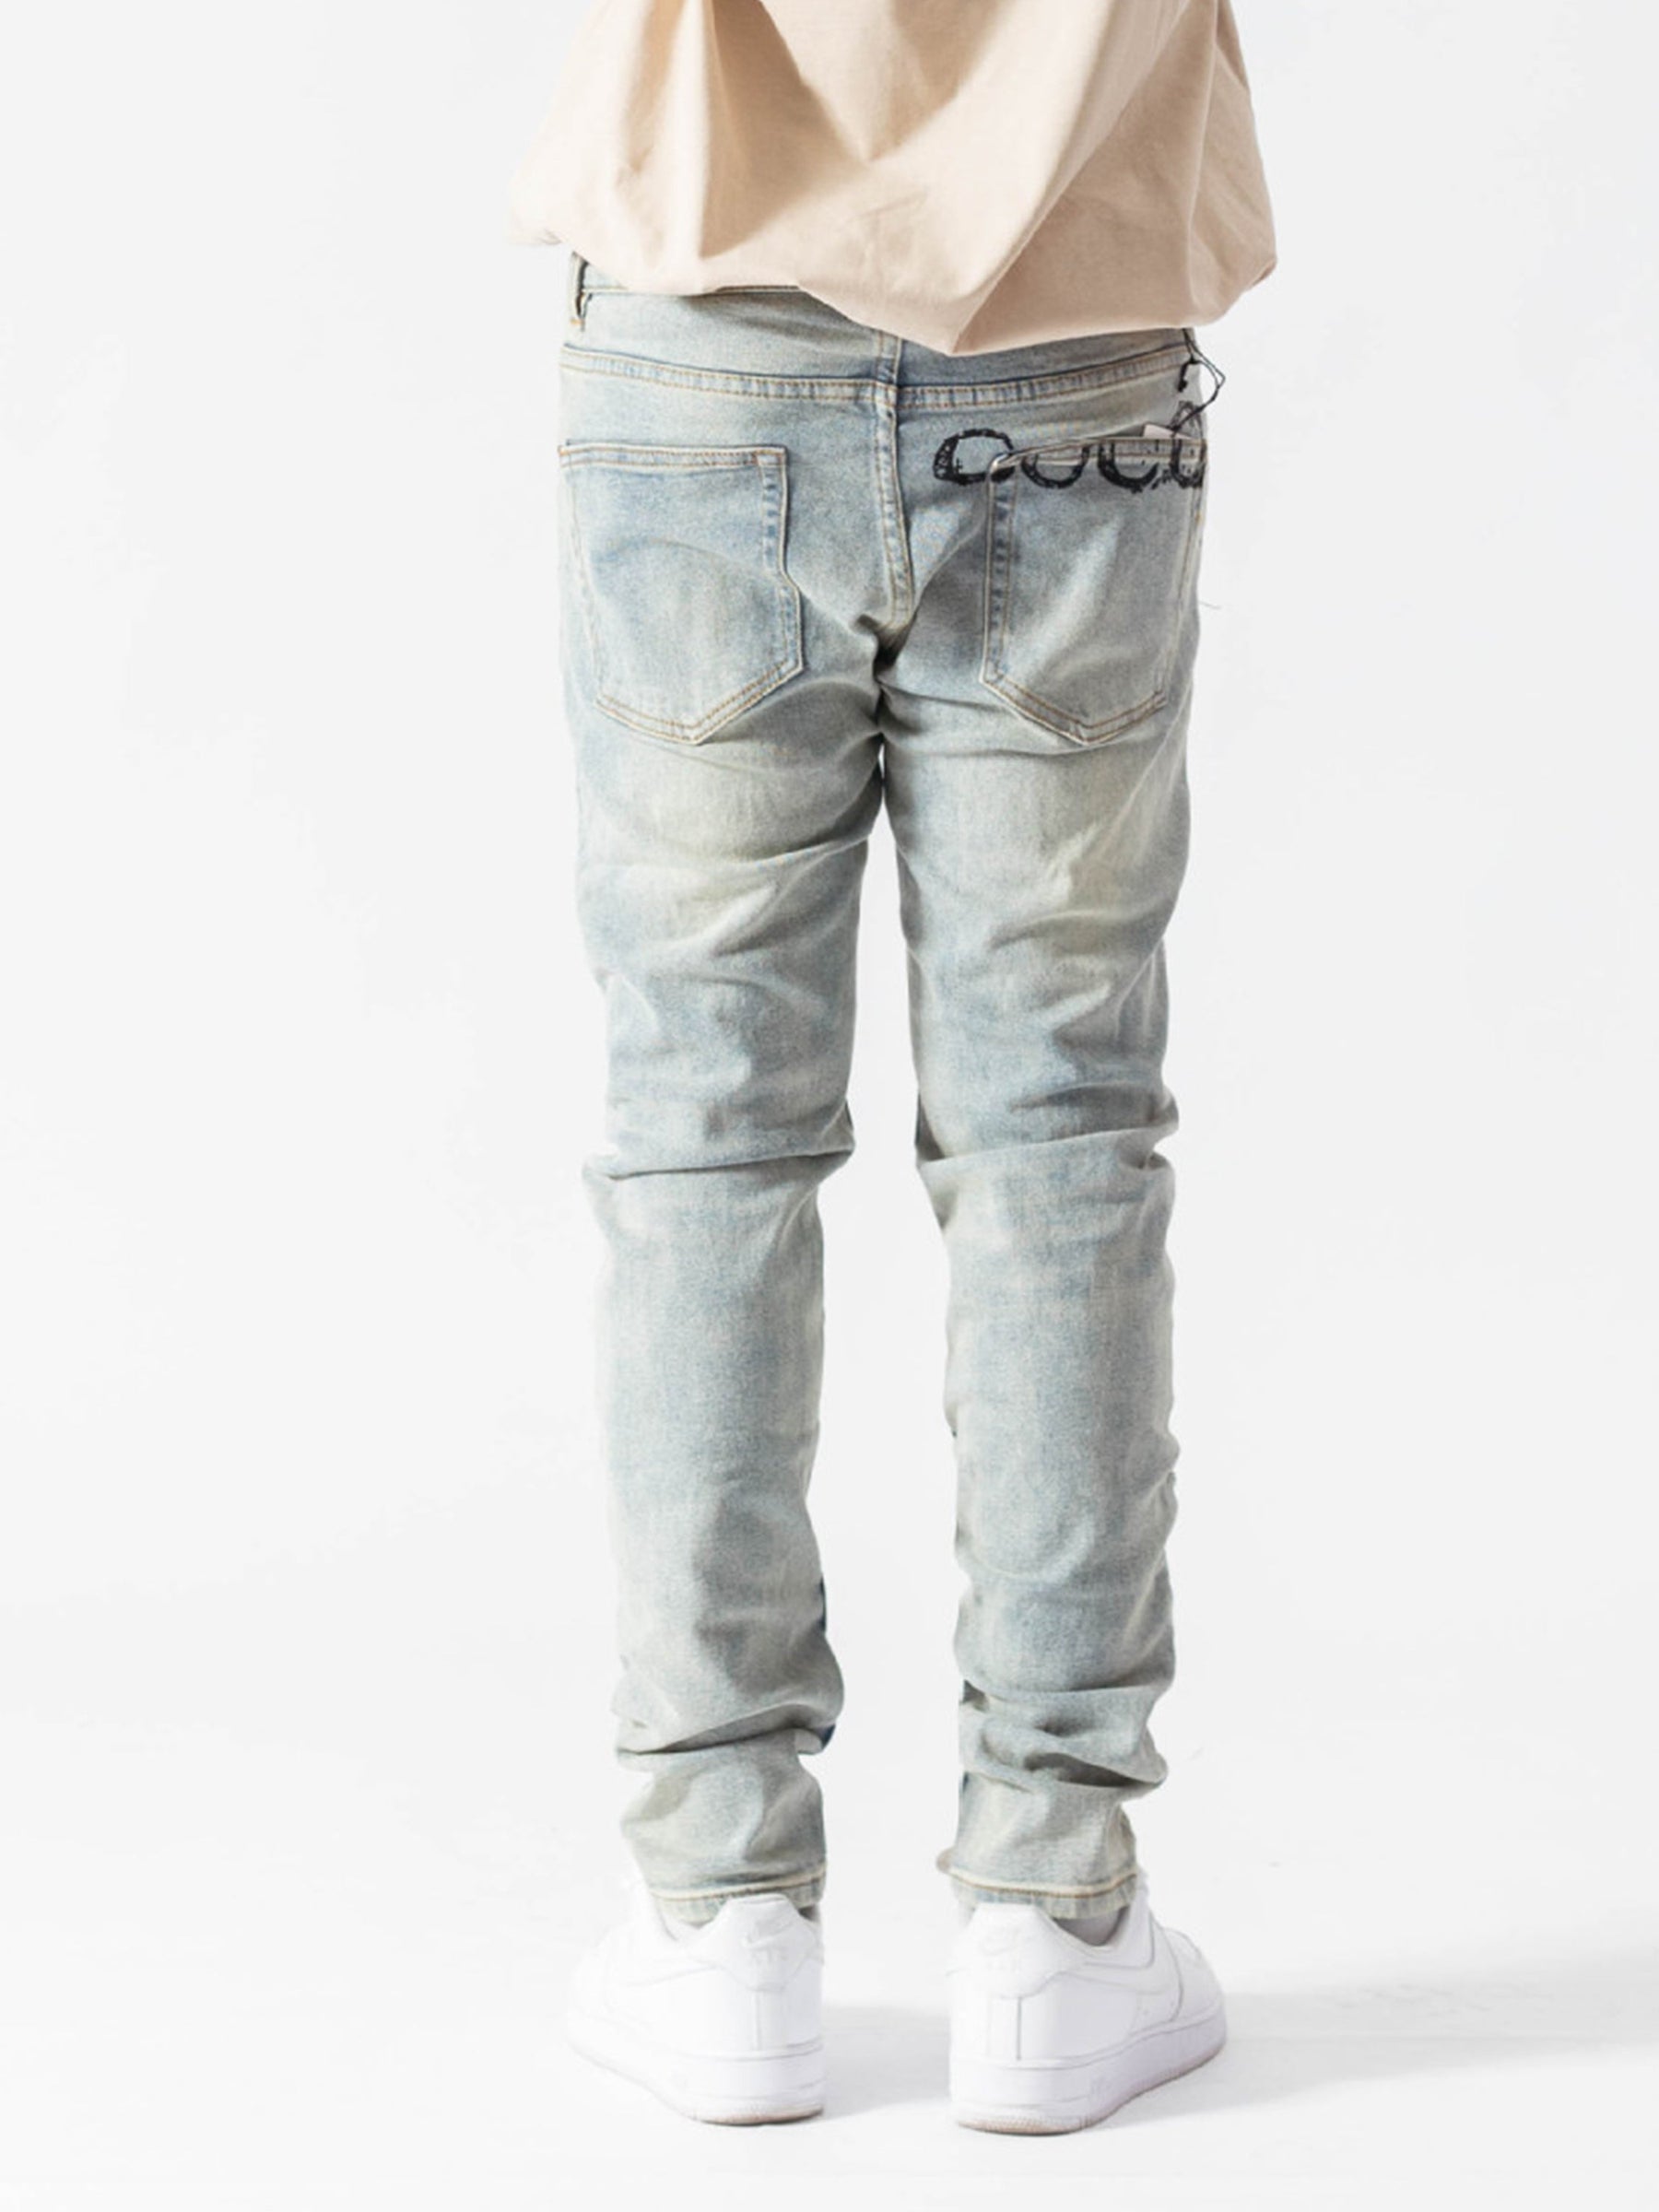 LUXENFY™ - Patchwork NY Embroidered Jeans -1170 luxenfy.com